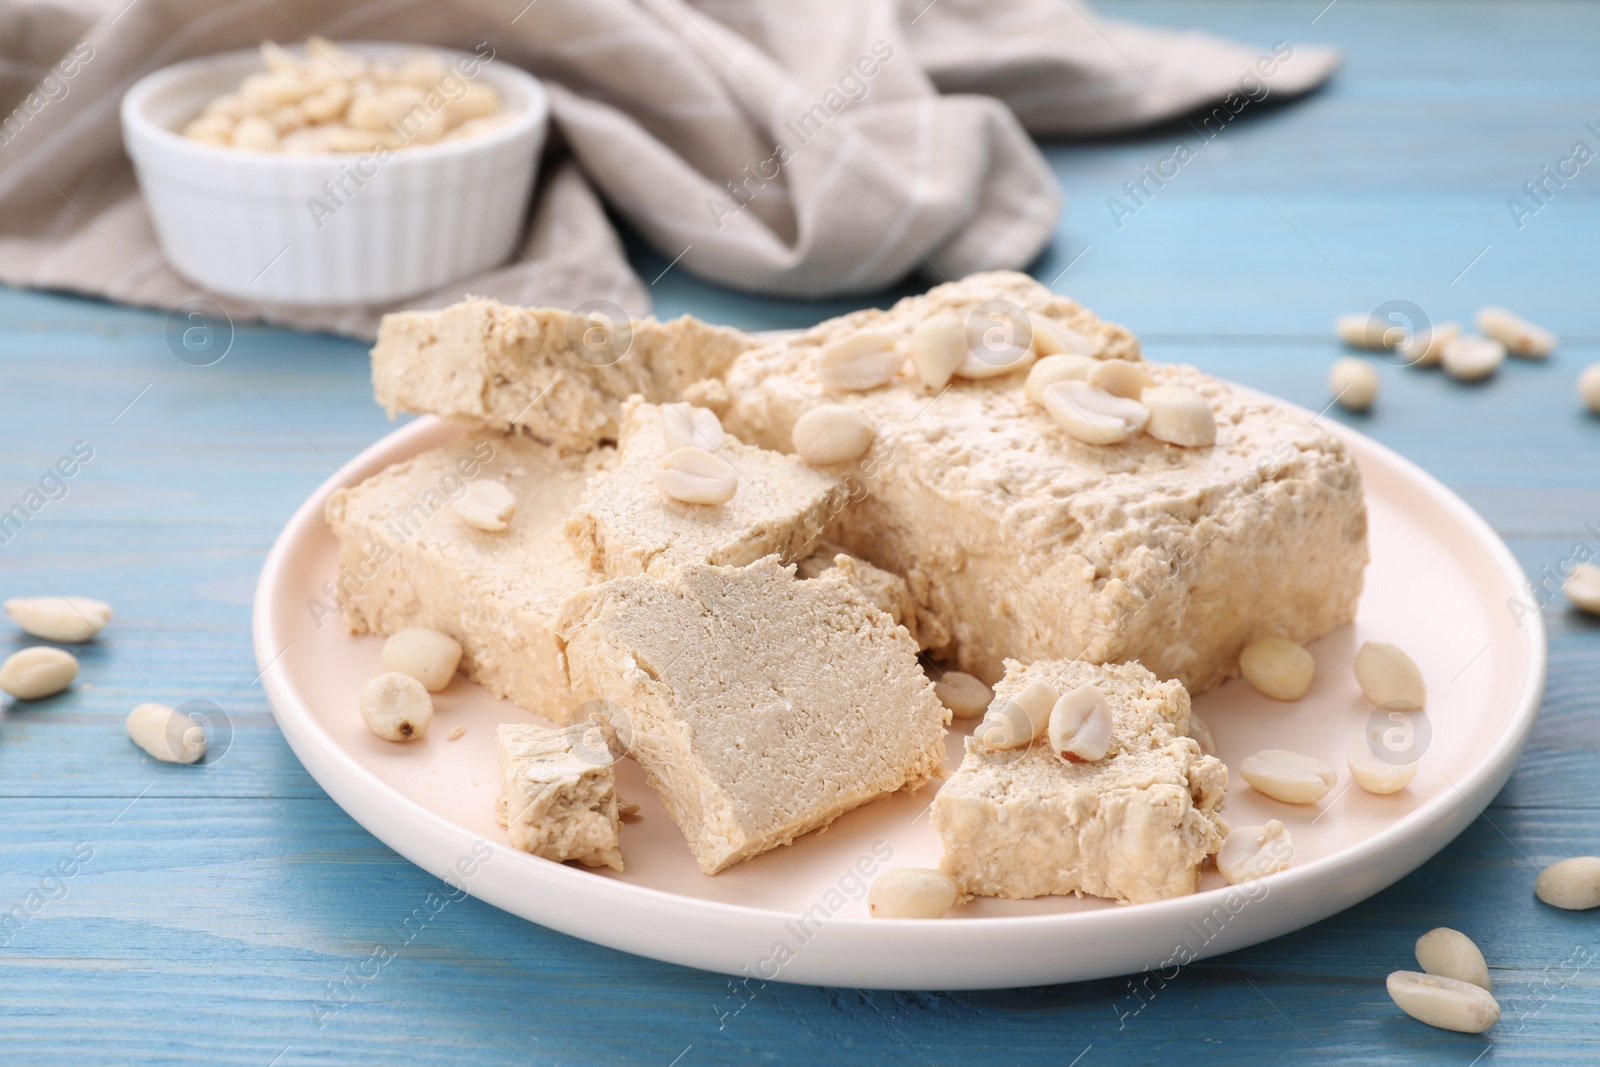 Photo of Plate with pieces of tasty halva and peanuts on light blue wooden table, closeup